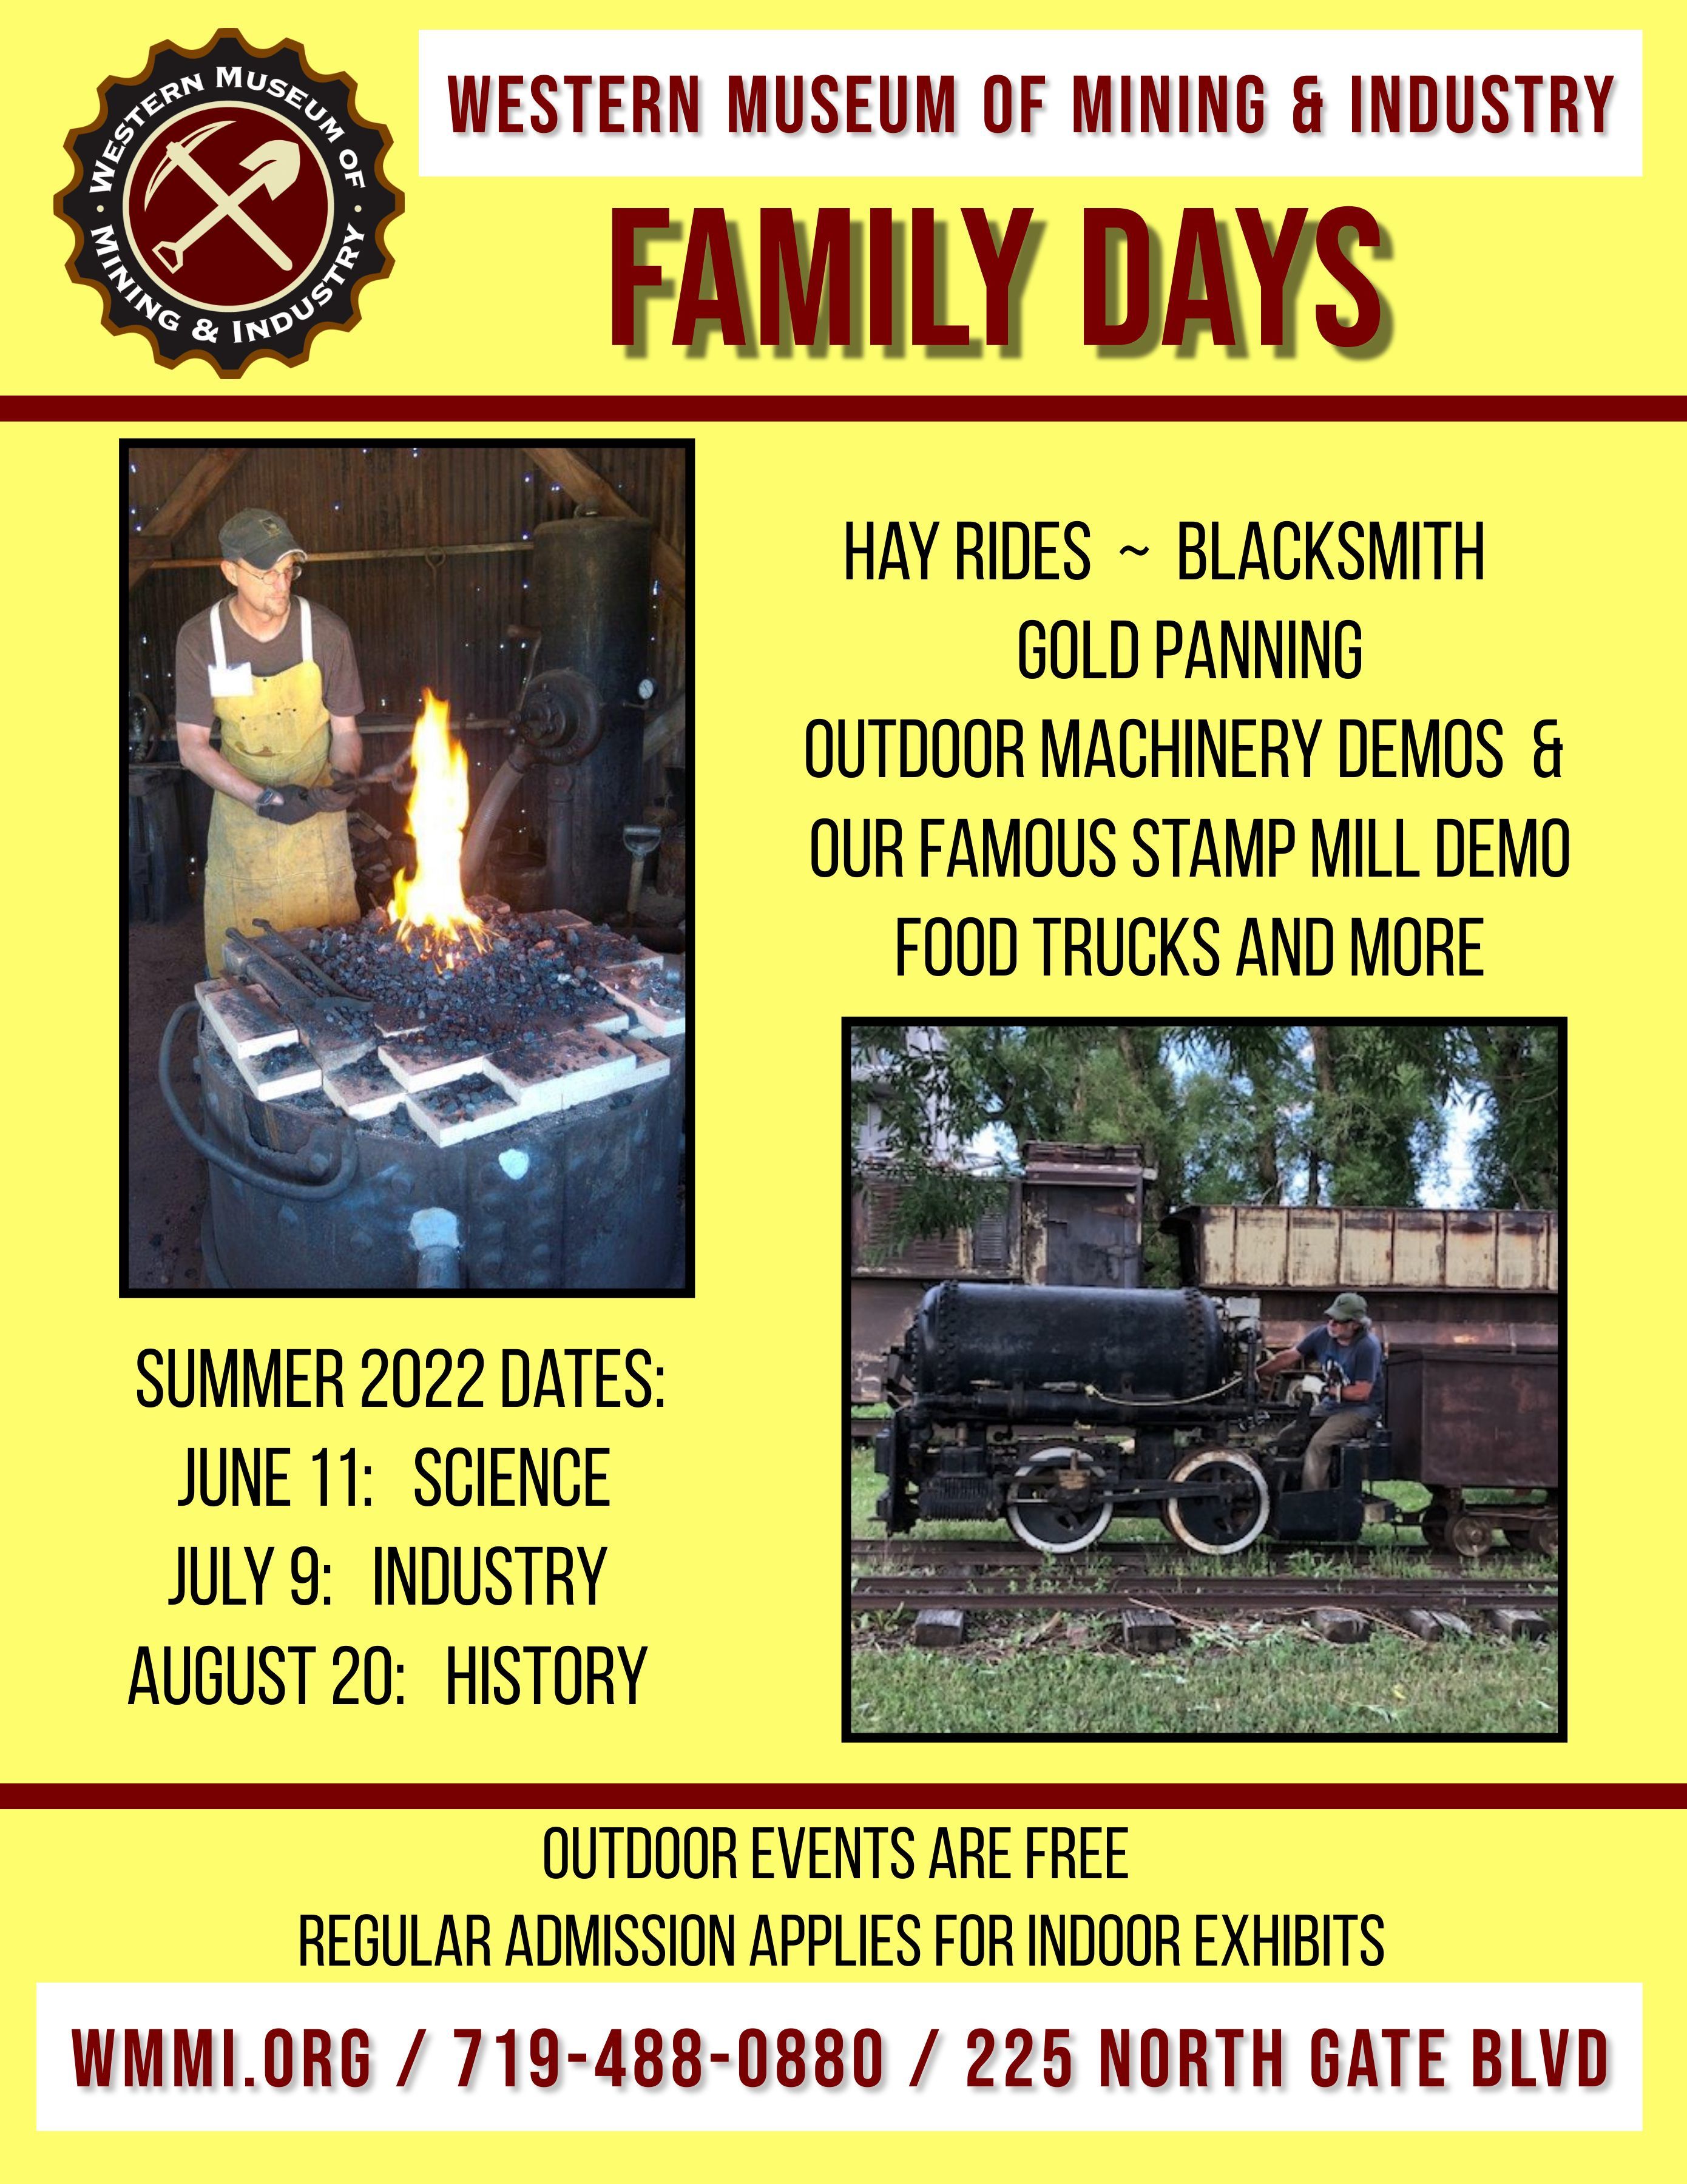 Family Days at WMMI. Outoor Machine Demonstrations, Blacksmiths, Hayrides.  